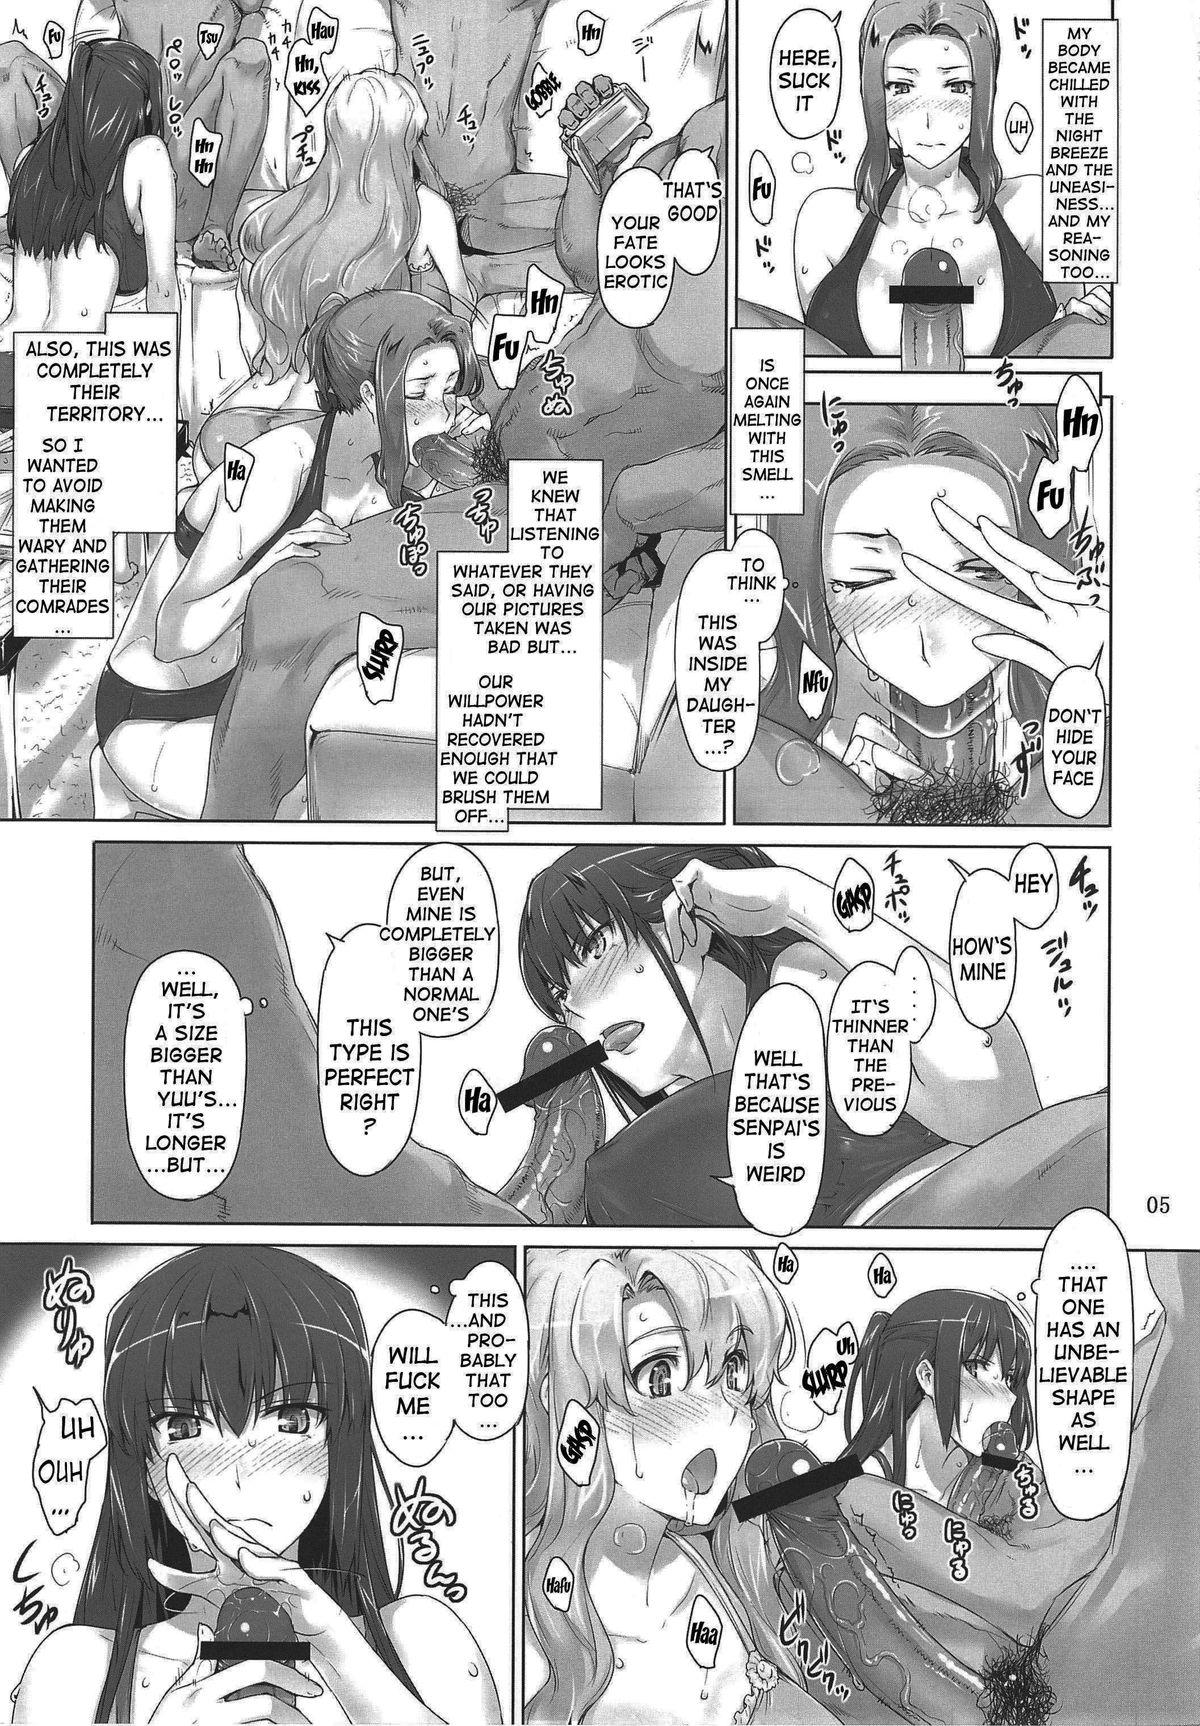 Girl Gets Fucked Mtsp - Tachibana-san's Circumstabces WIth a Man 3 Long - Page 4